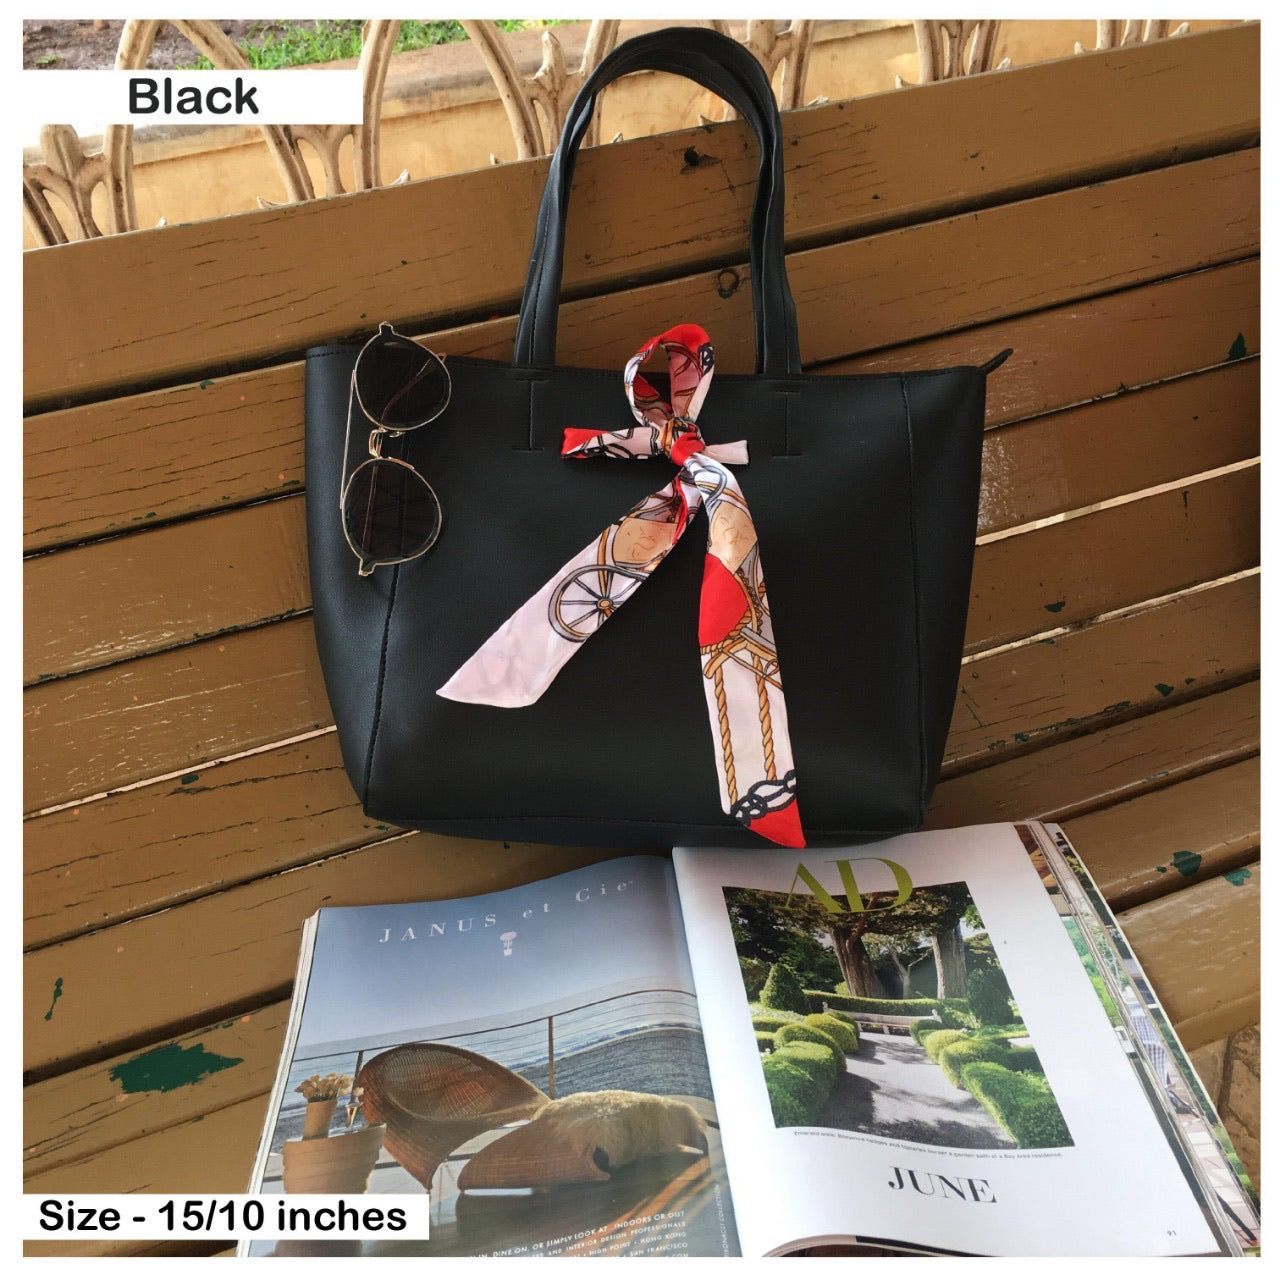 Medium size tote bag with Scarf